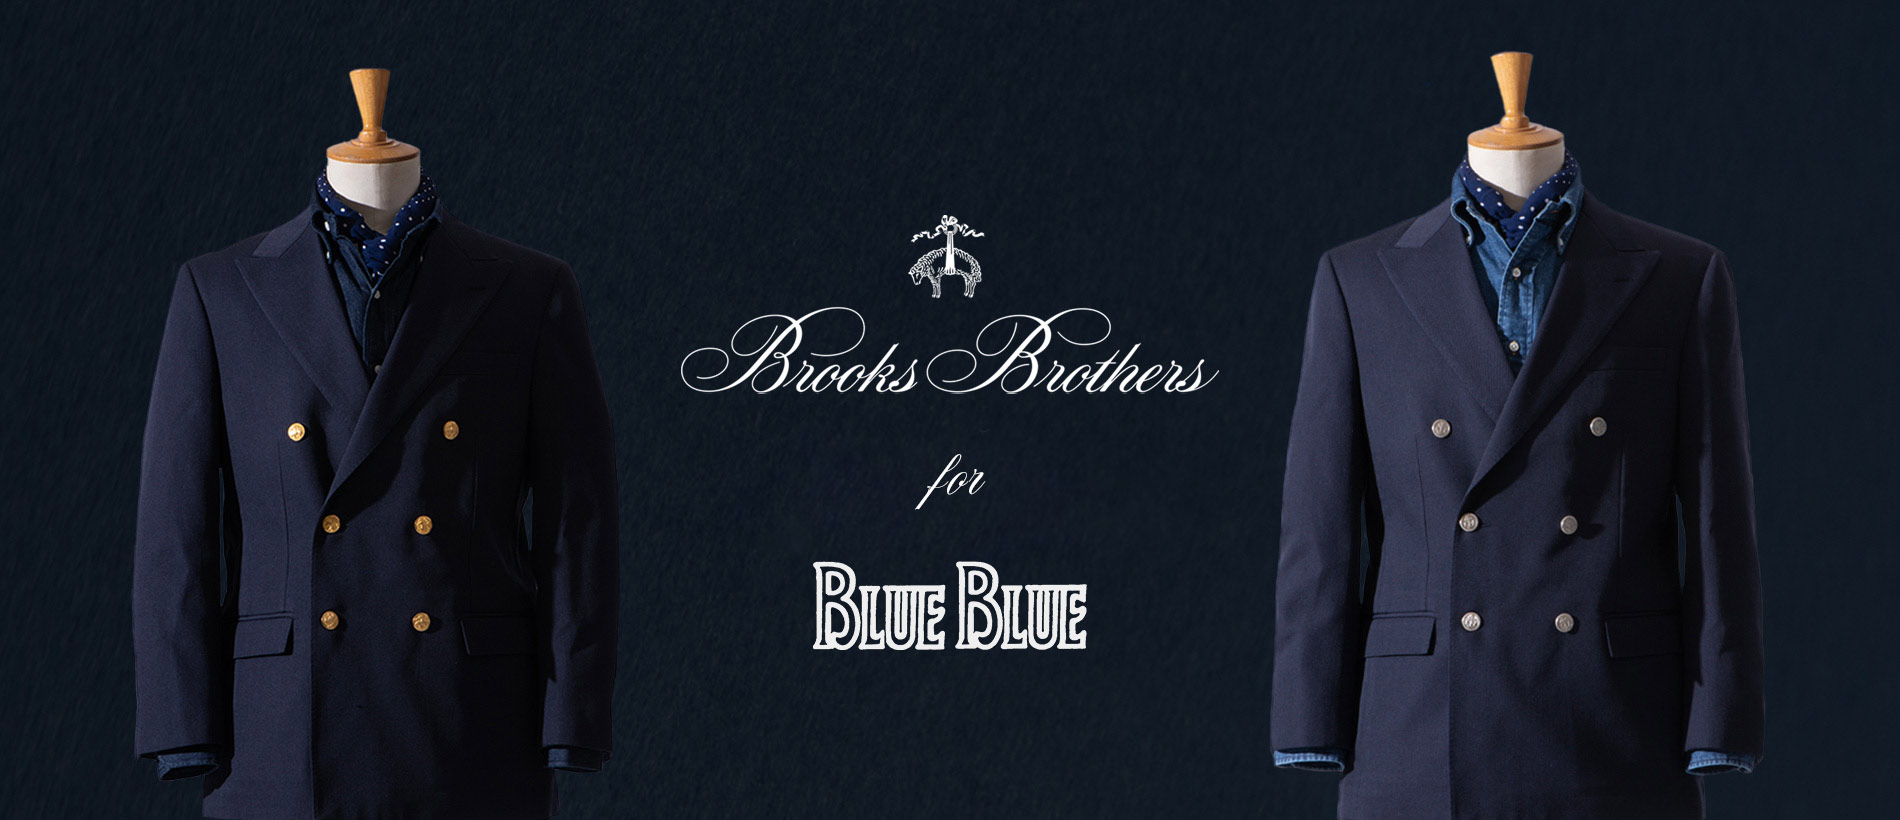 brooksbrothers_for_blueblue